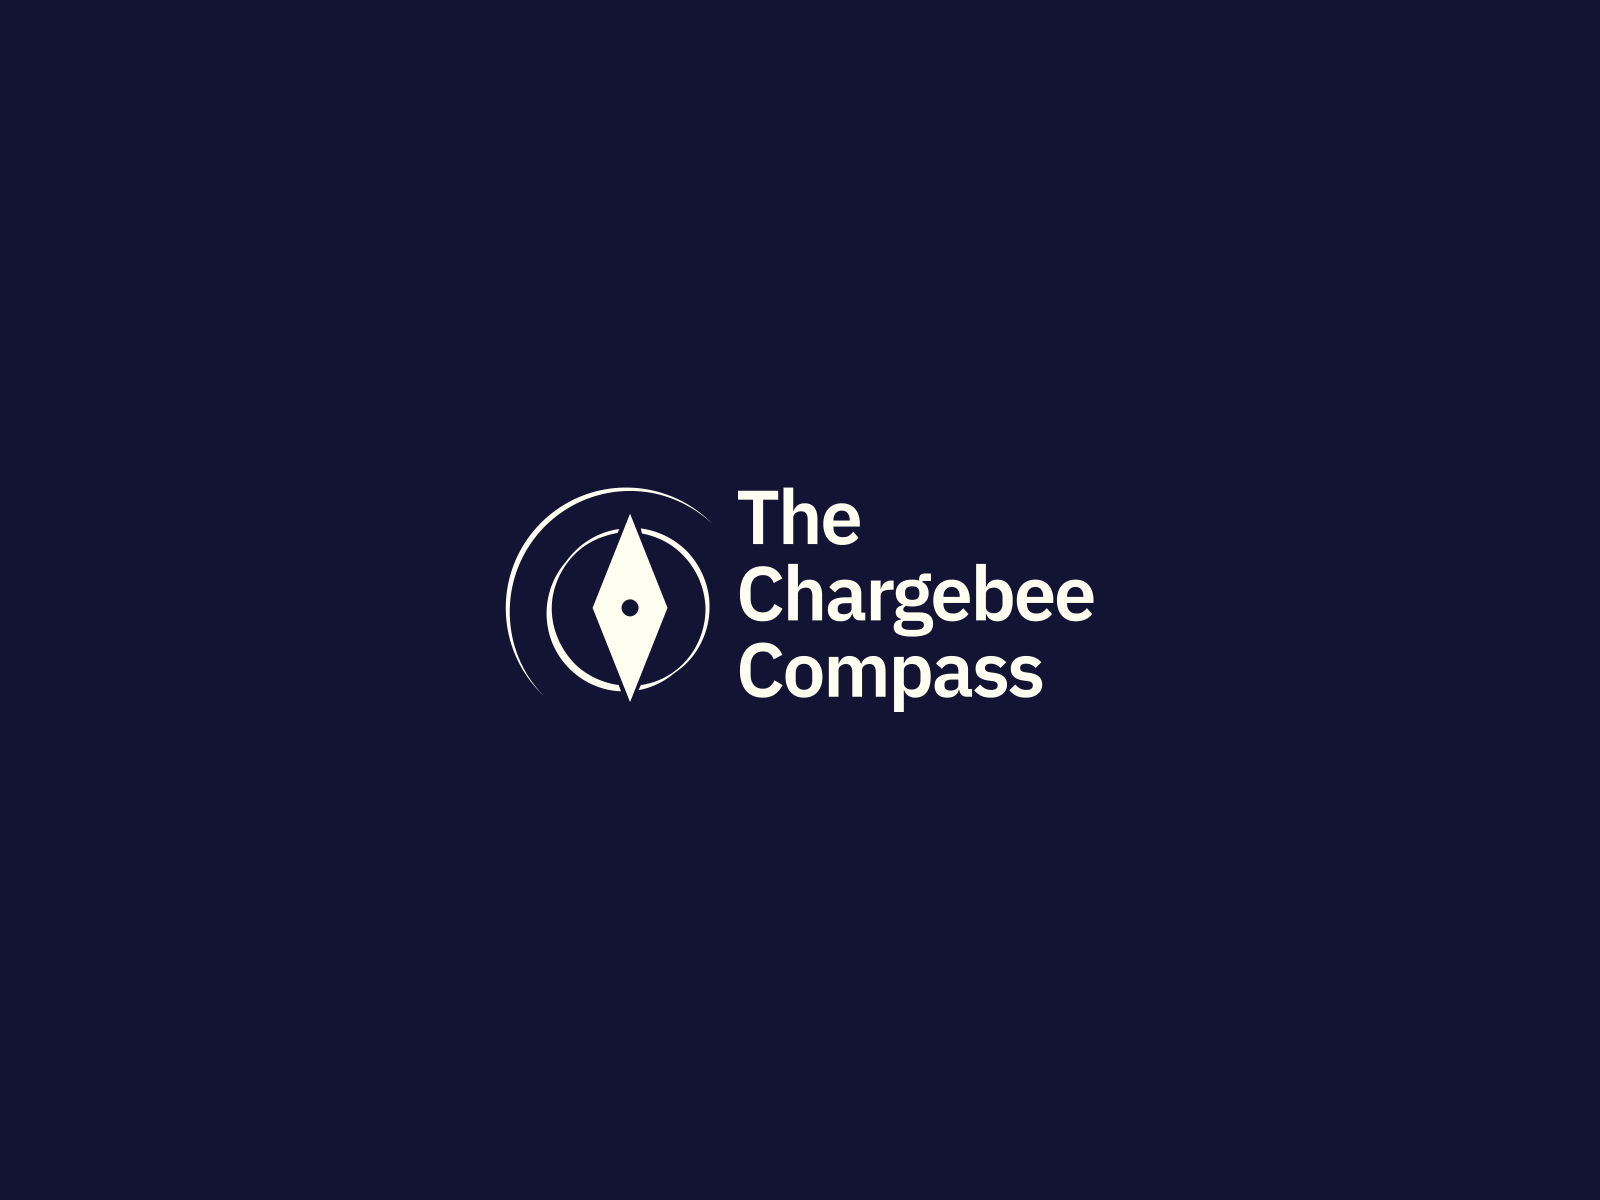 The Chargebee Compass - Branding by Adheedhan Ravikumar for Chargebee Design on Dribbble